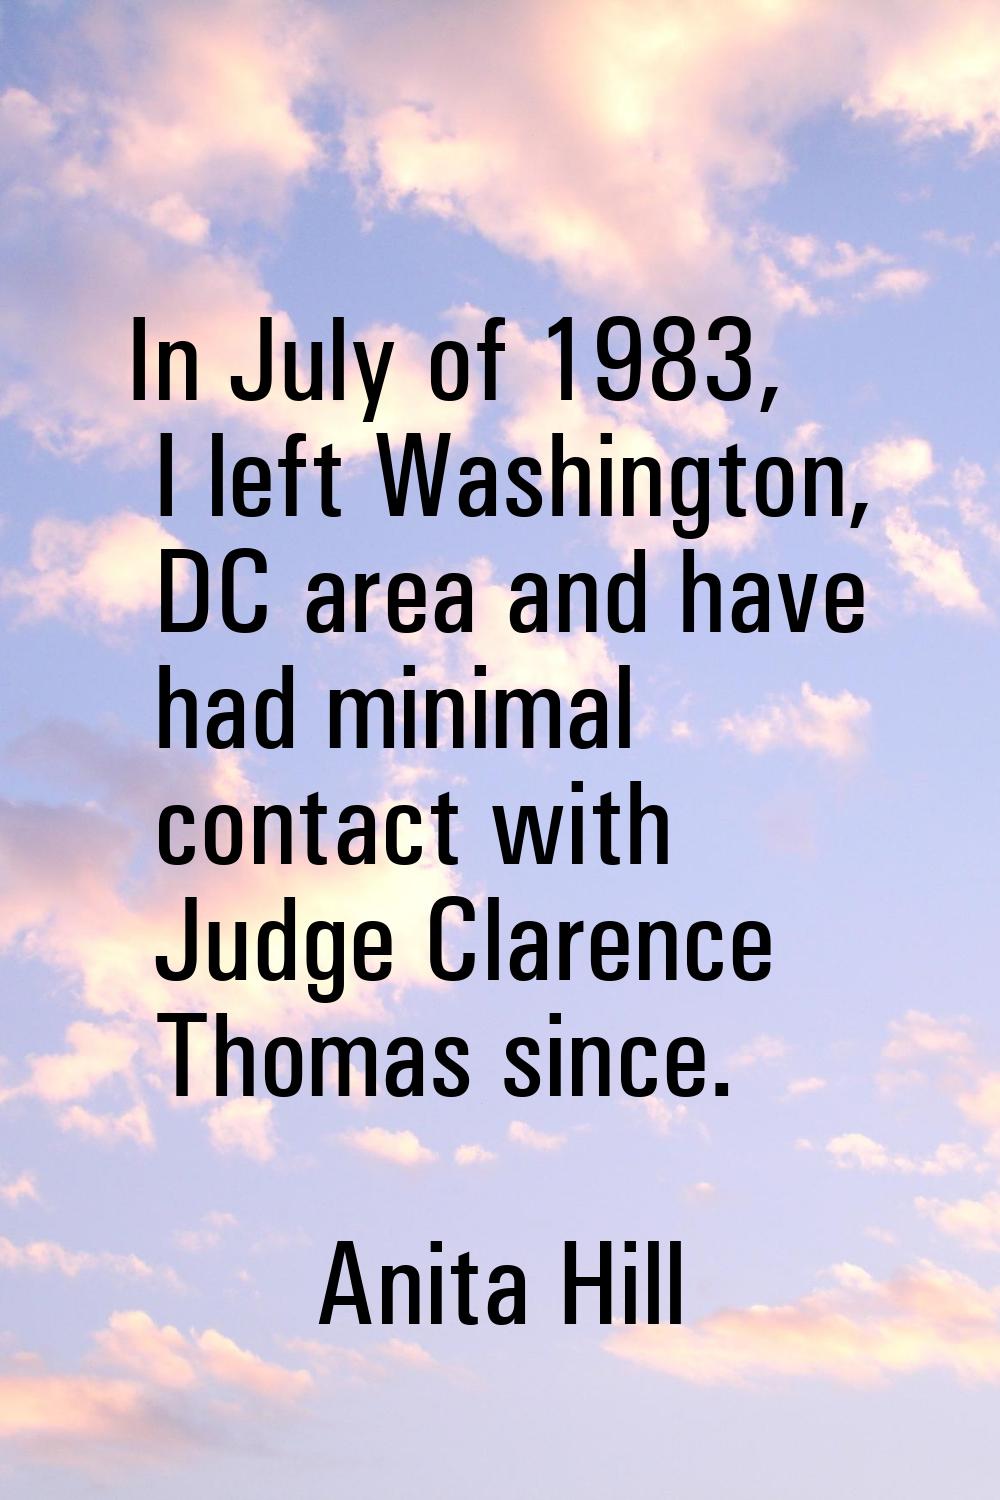 In July of 1983, I left Washington, DC area and have had minimal contact with Judge Clarence Thomas